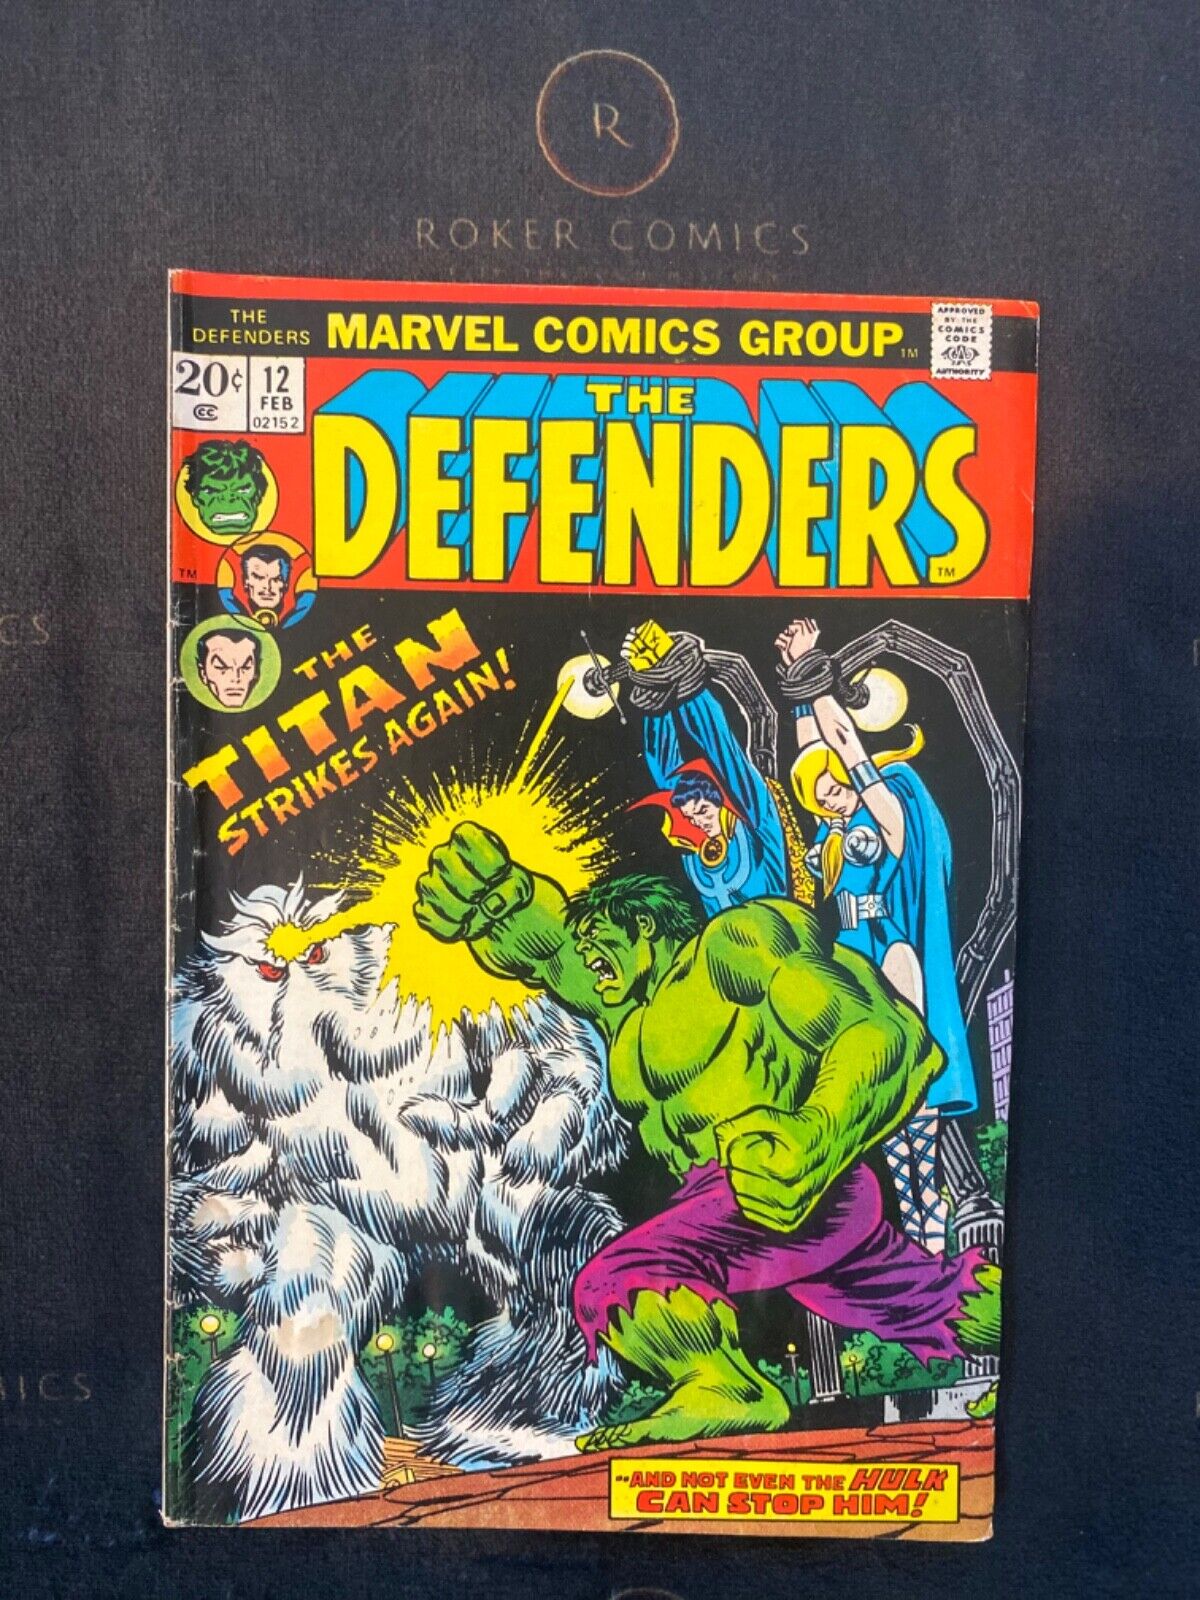 RARE 1974 Defenders #12 KEY Issue: First Appearance of Dragonfang